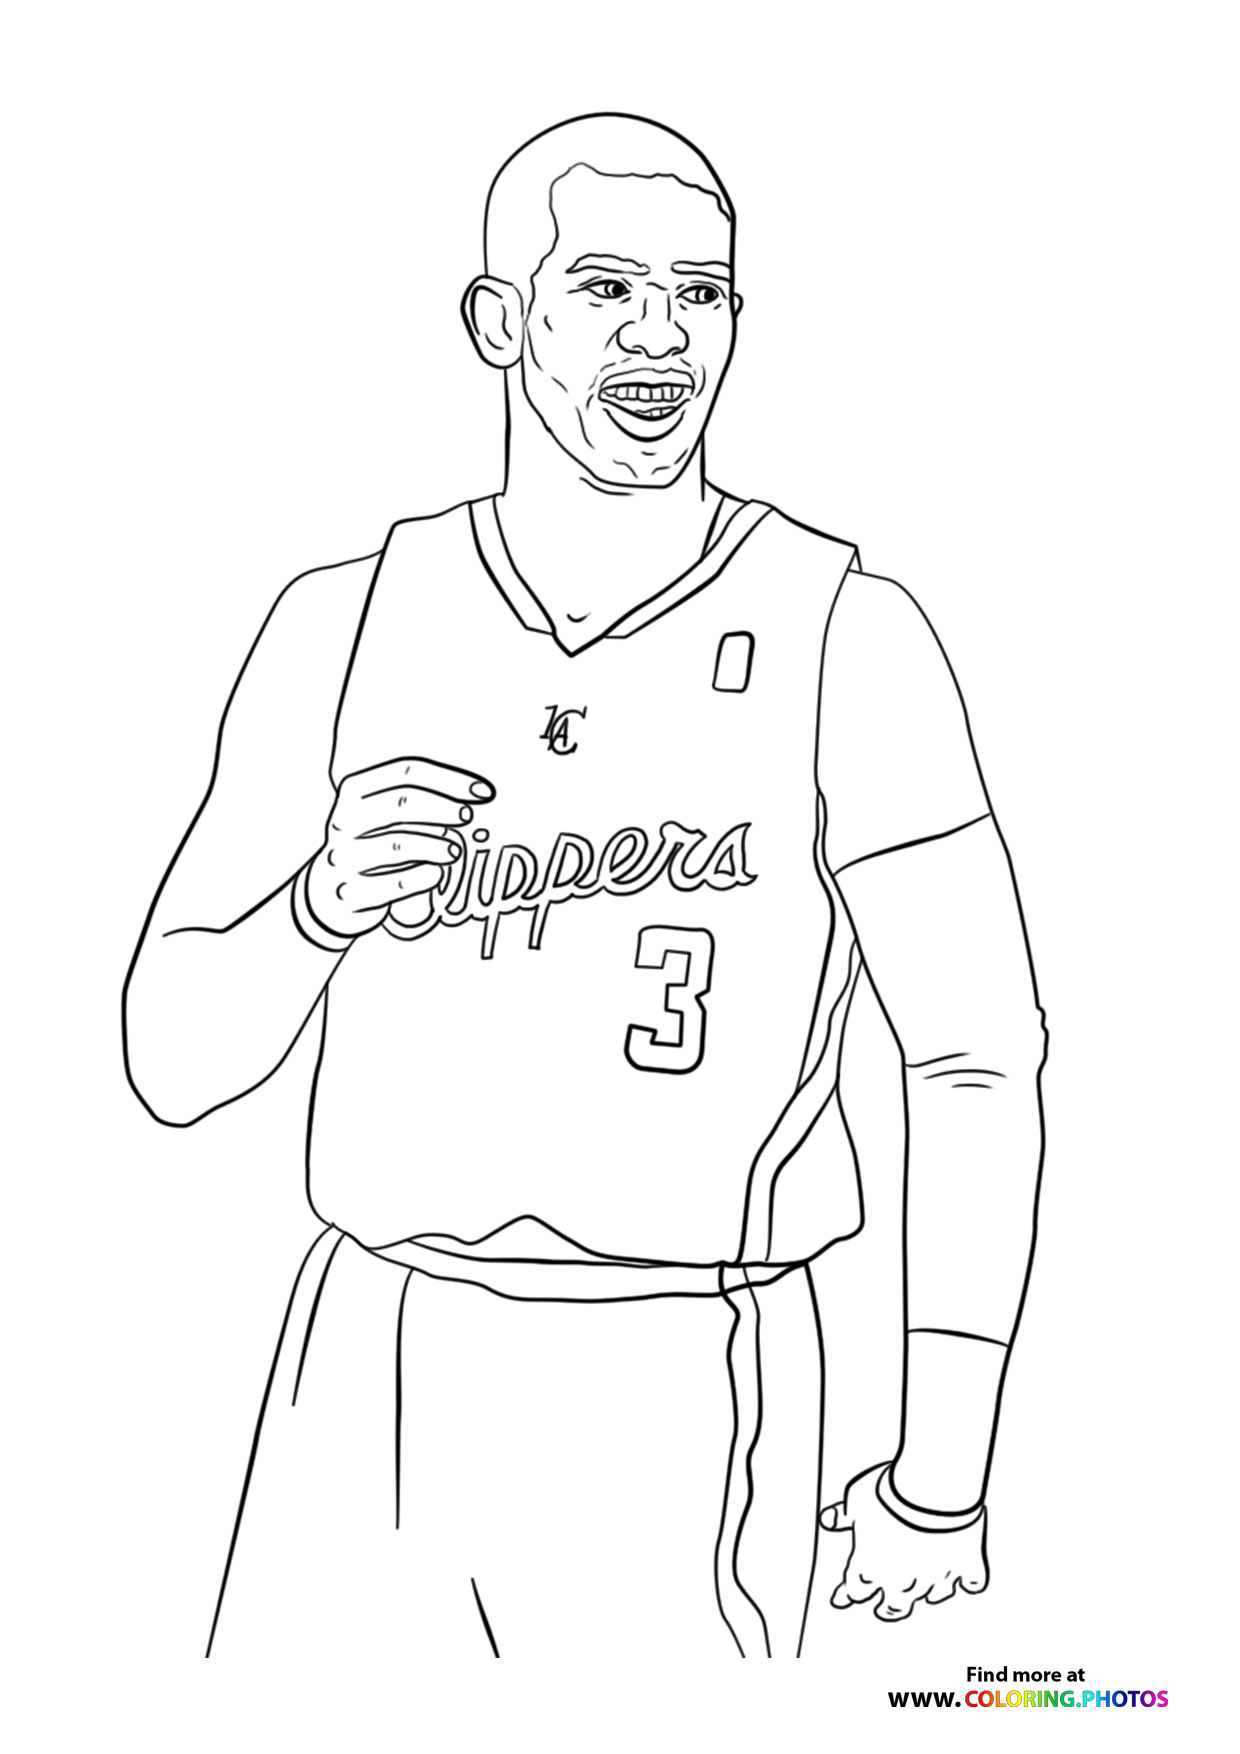 chris paul - Coloring Pages for kids